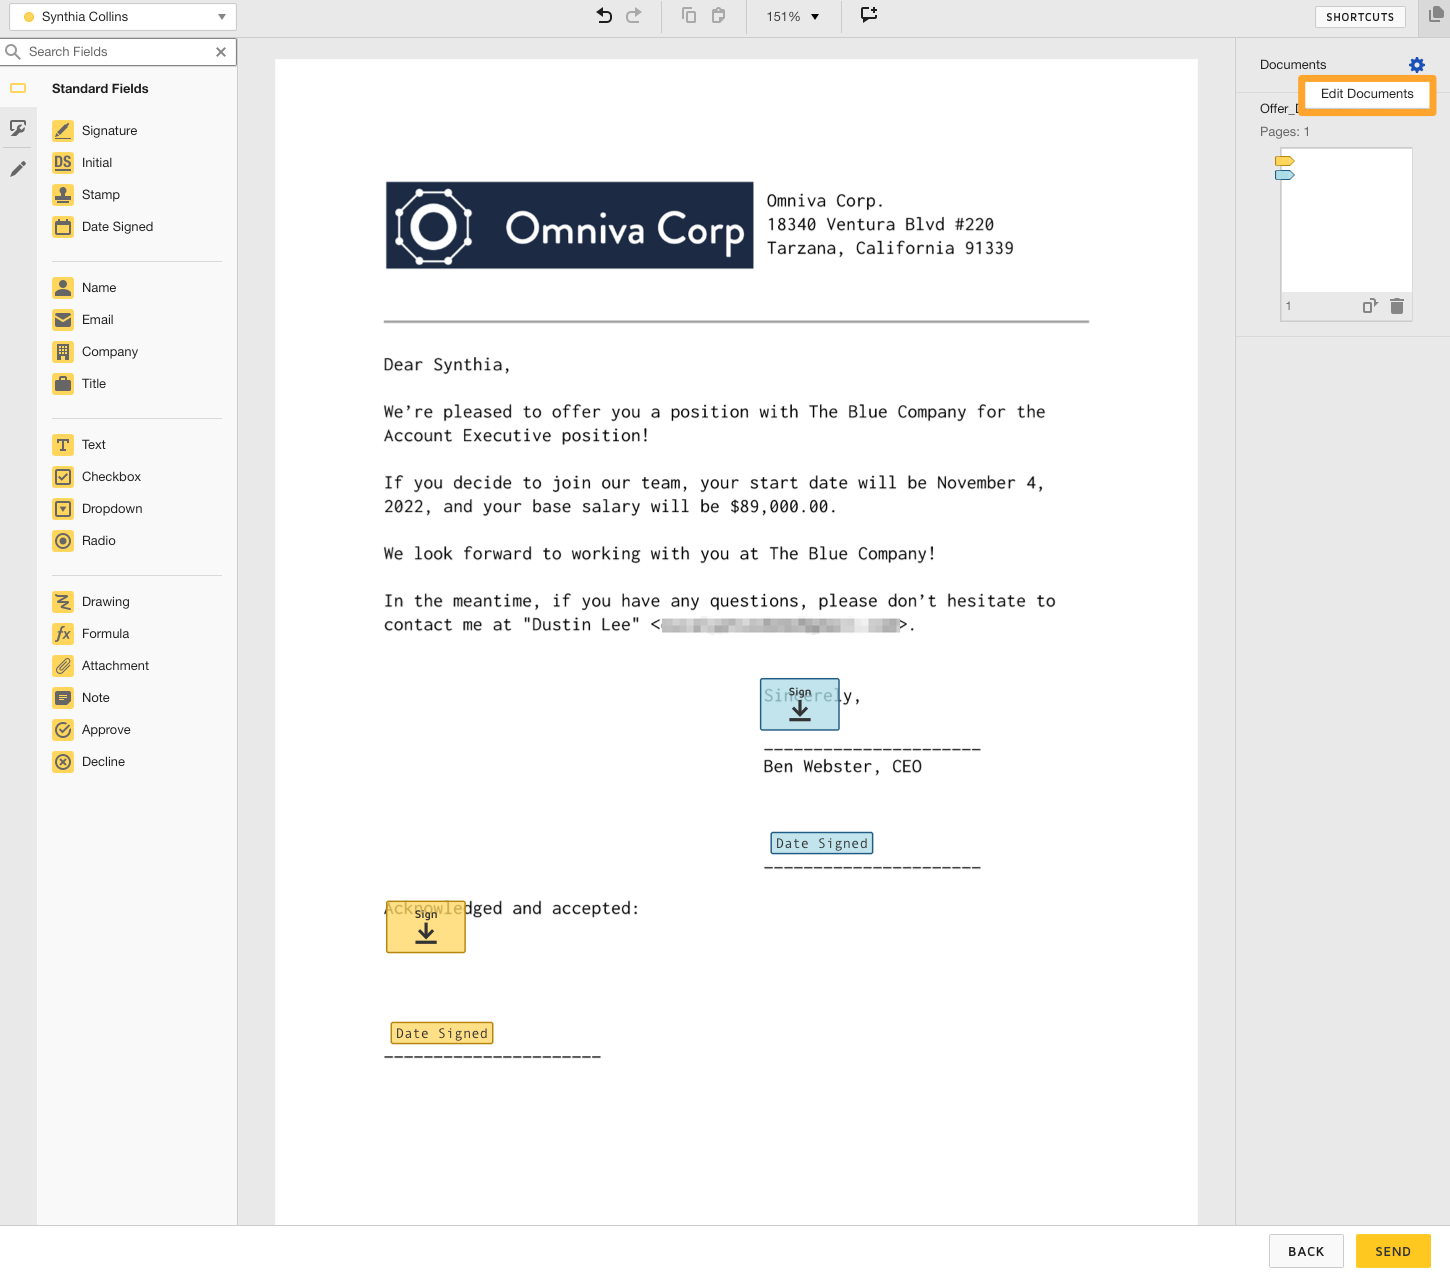 An example offer letter is shown on DocuSign from Omniva Corp with the Edit Documents button highlighted at the top-right